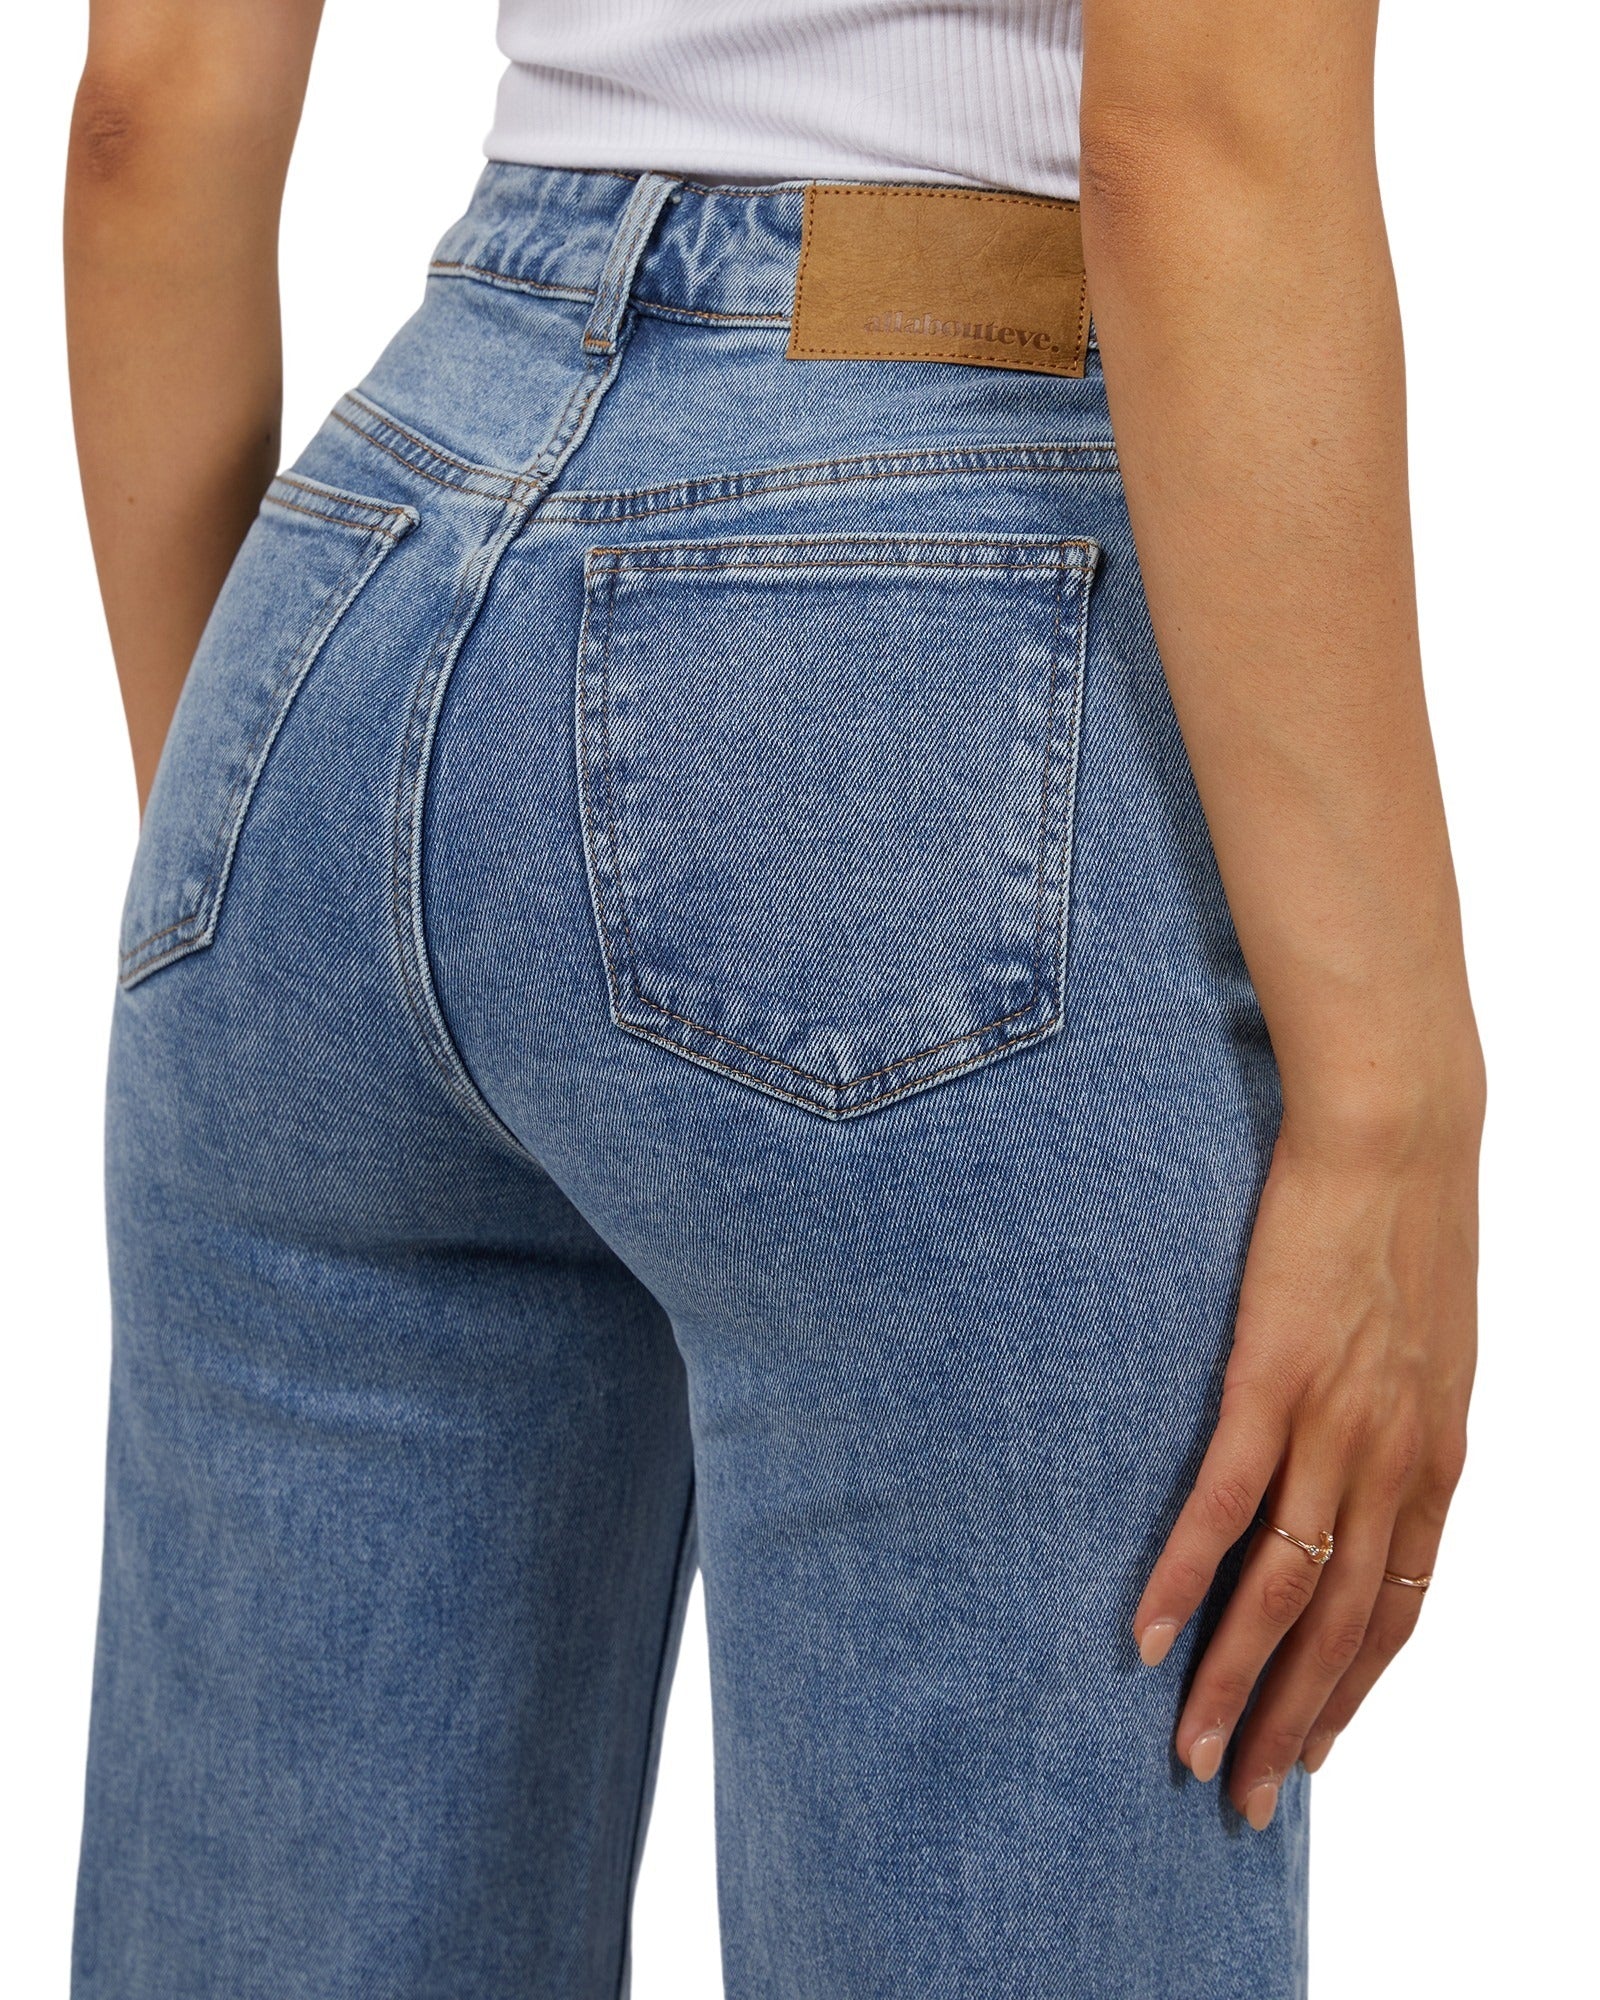 All About Eve - Skye Comfort Jean - Heritage Blue